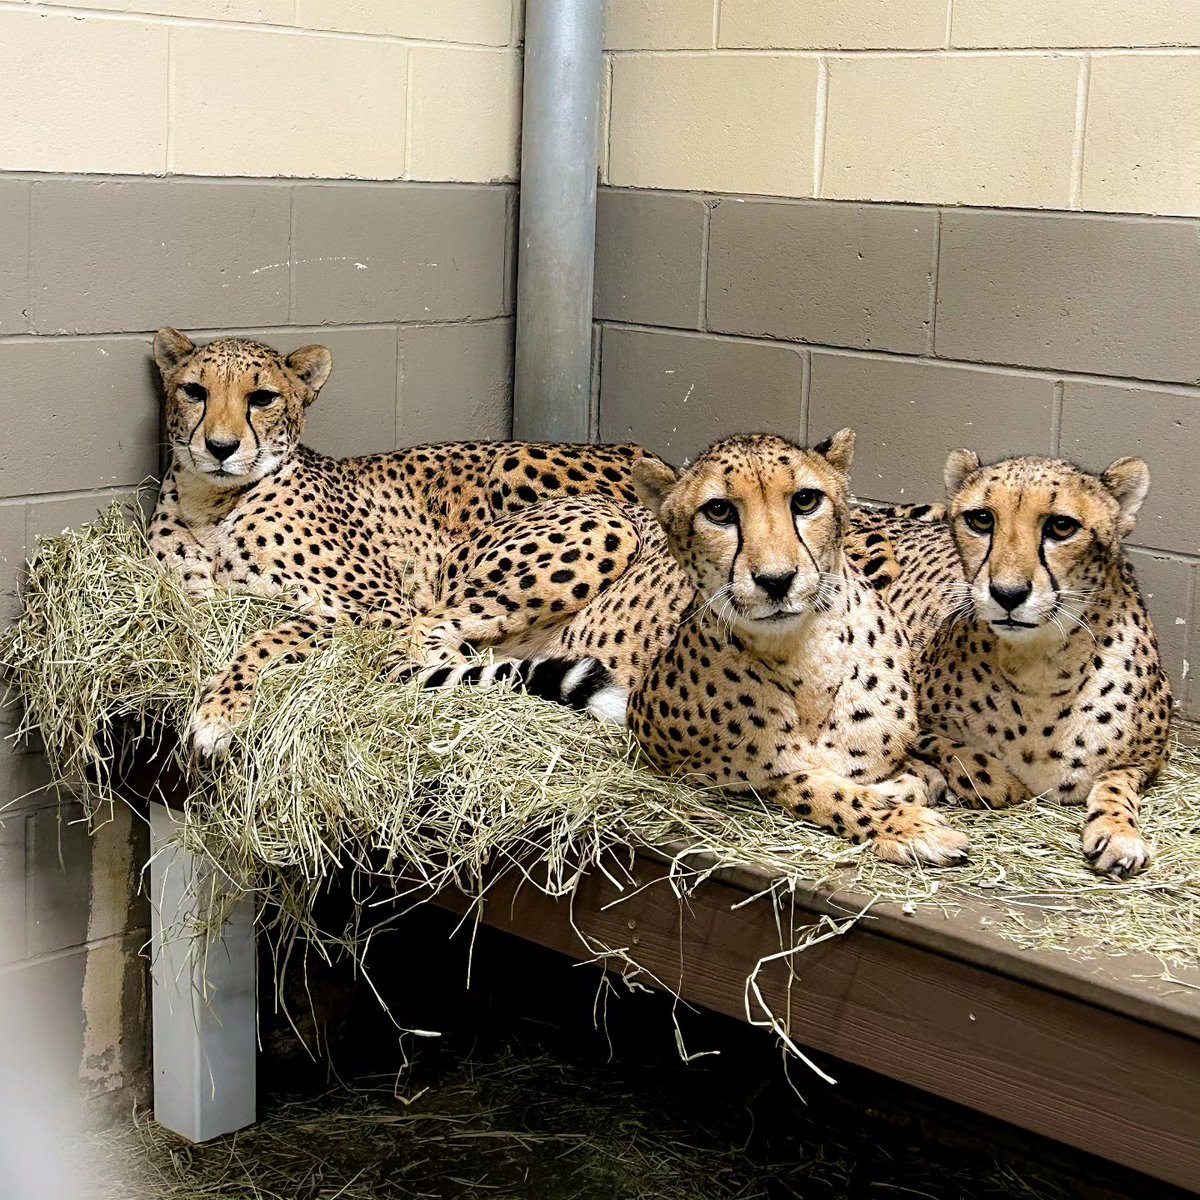 Cheetah cuddle puddle! ❤️ These three sisters are keeping warm and purrfectly content on this chilly day. 📷: Keeper Laura